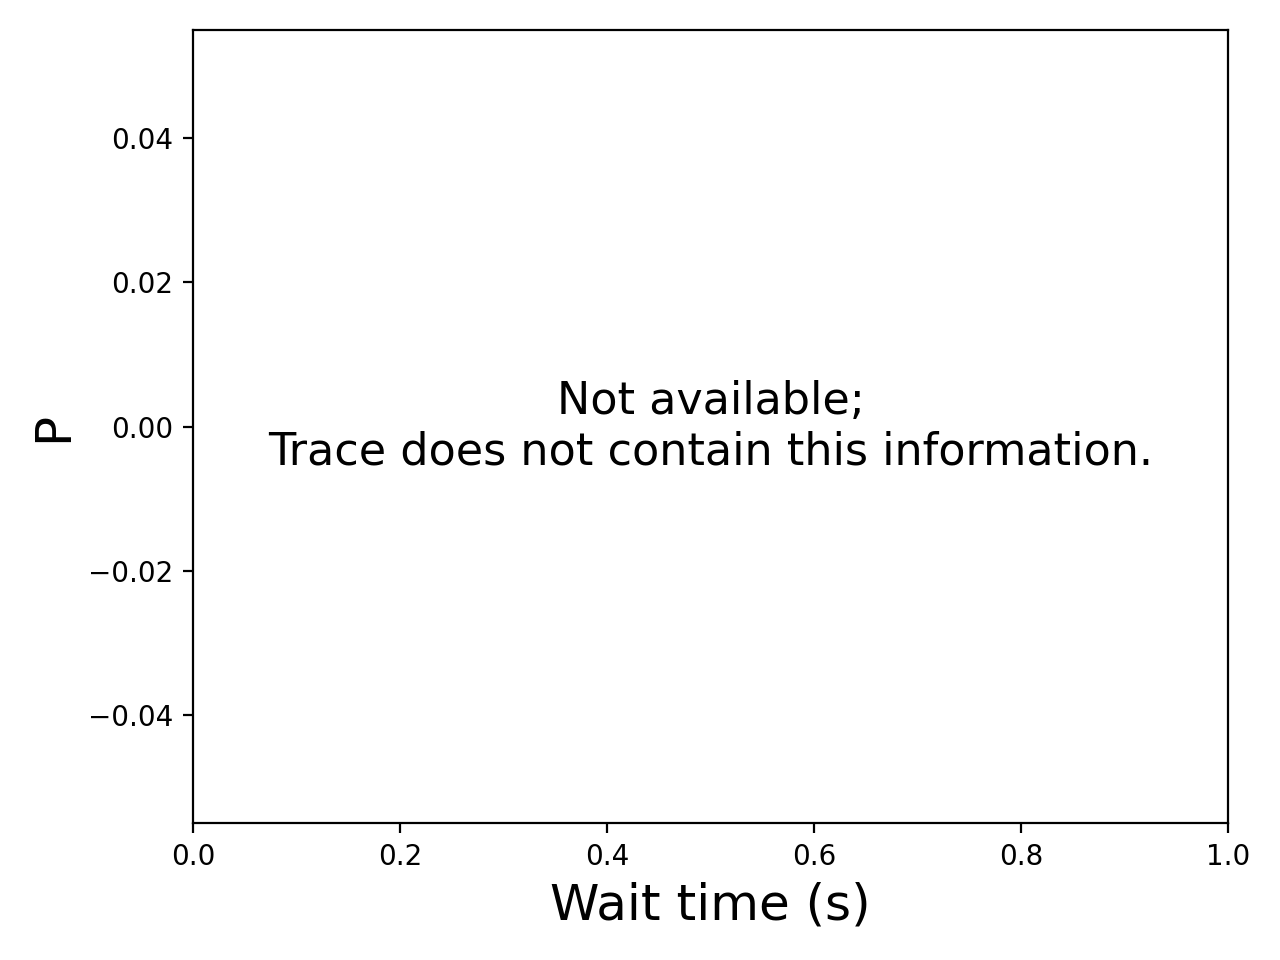 Task wait time CDF graph for the Galaxy trace.